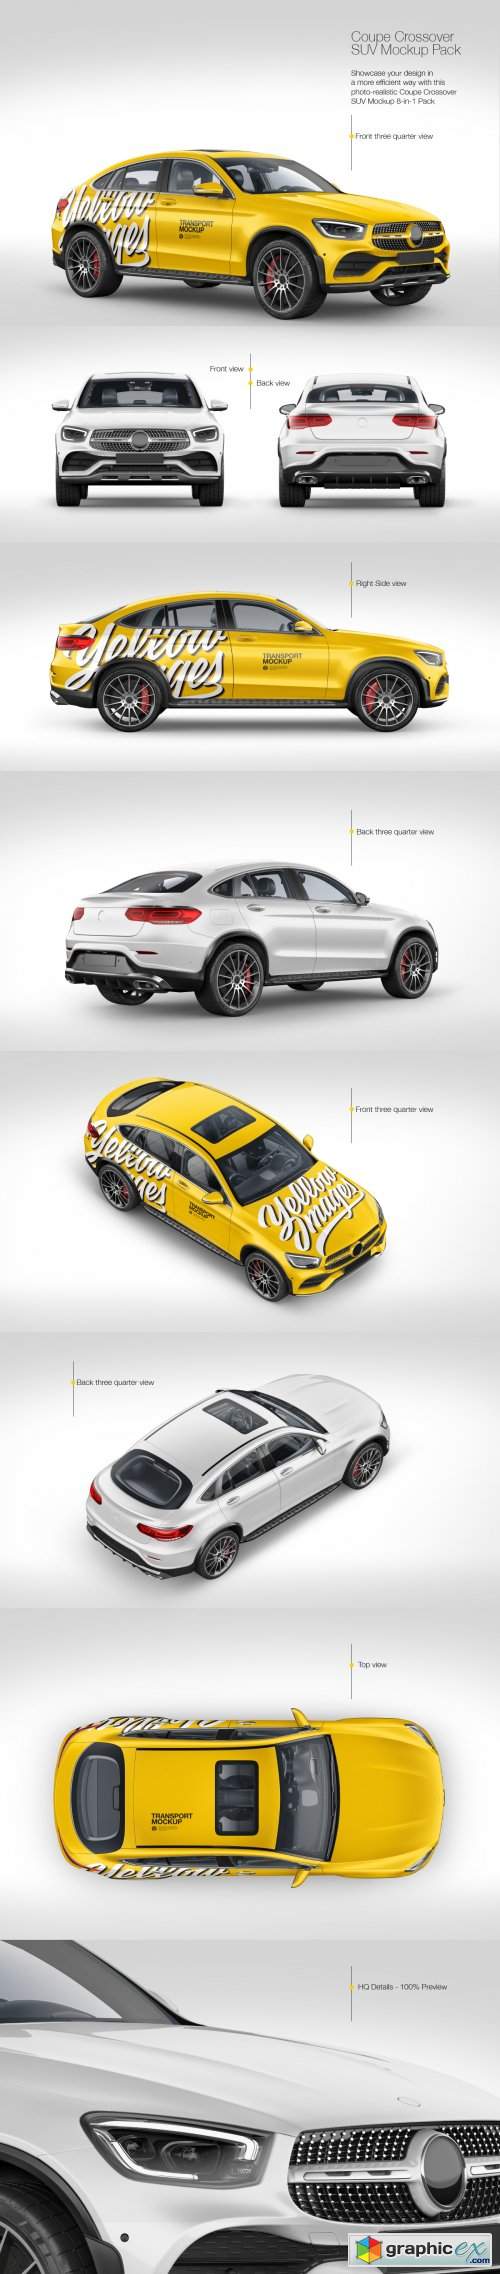 Coupe Crossover SUV Mockup Pack